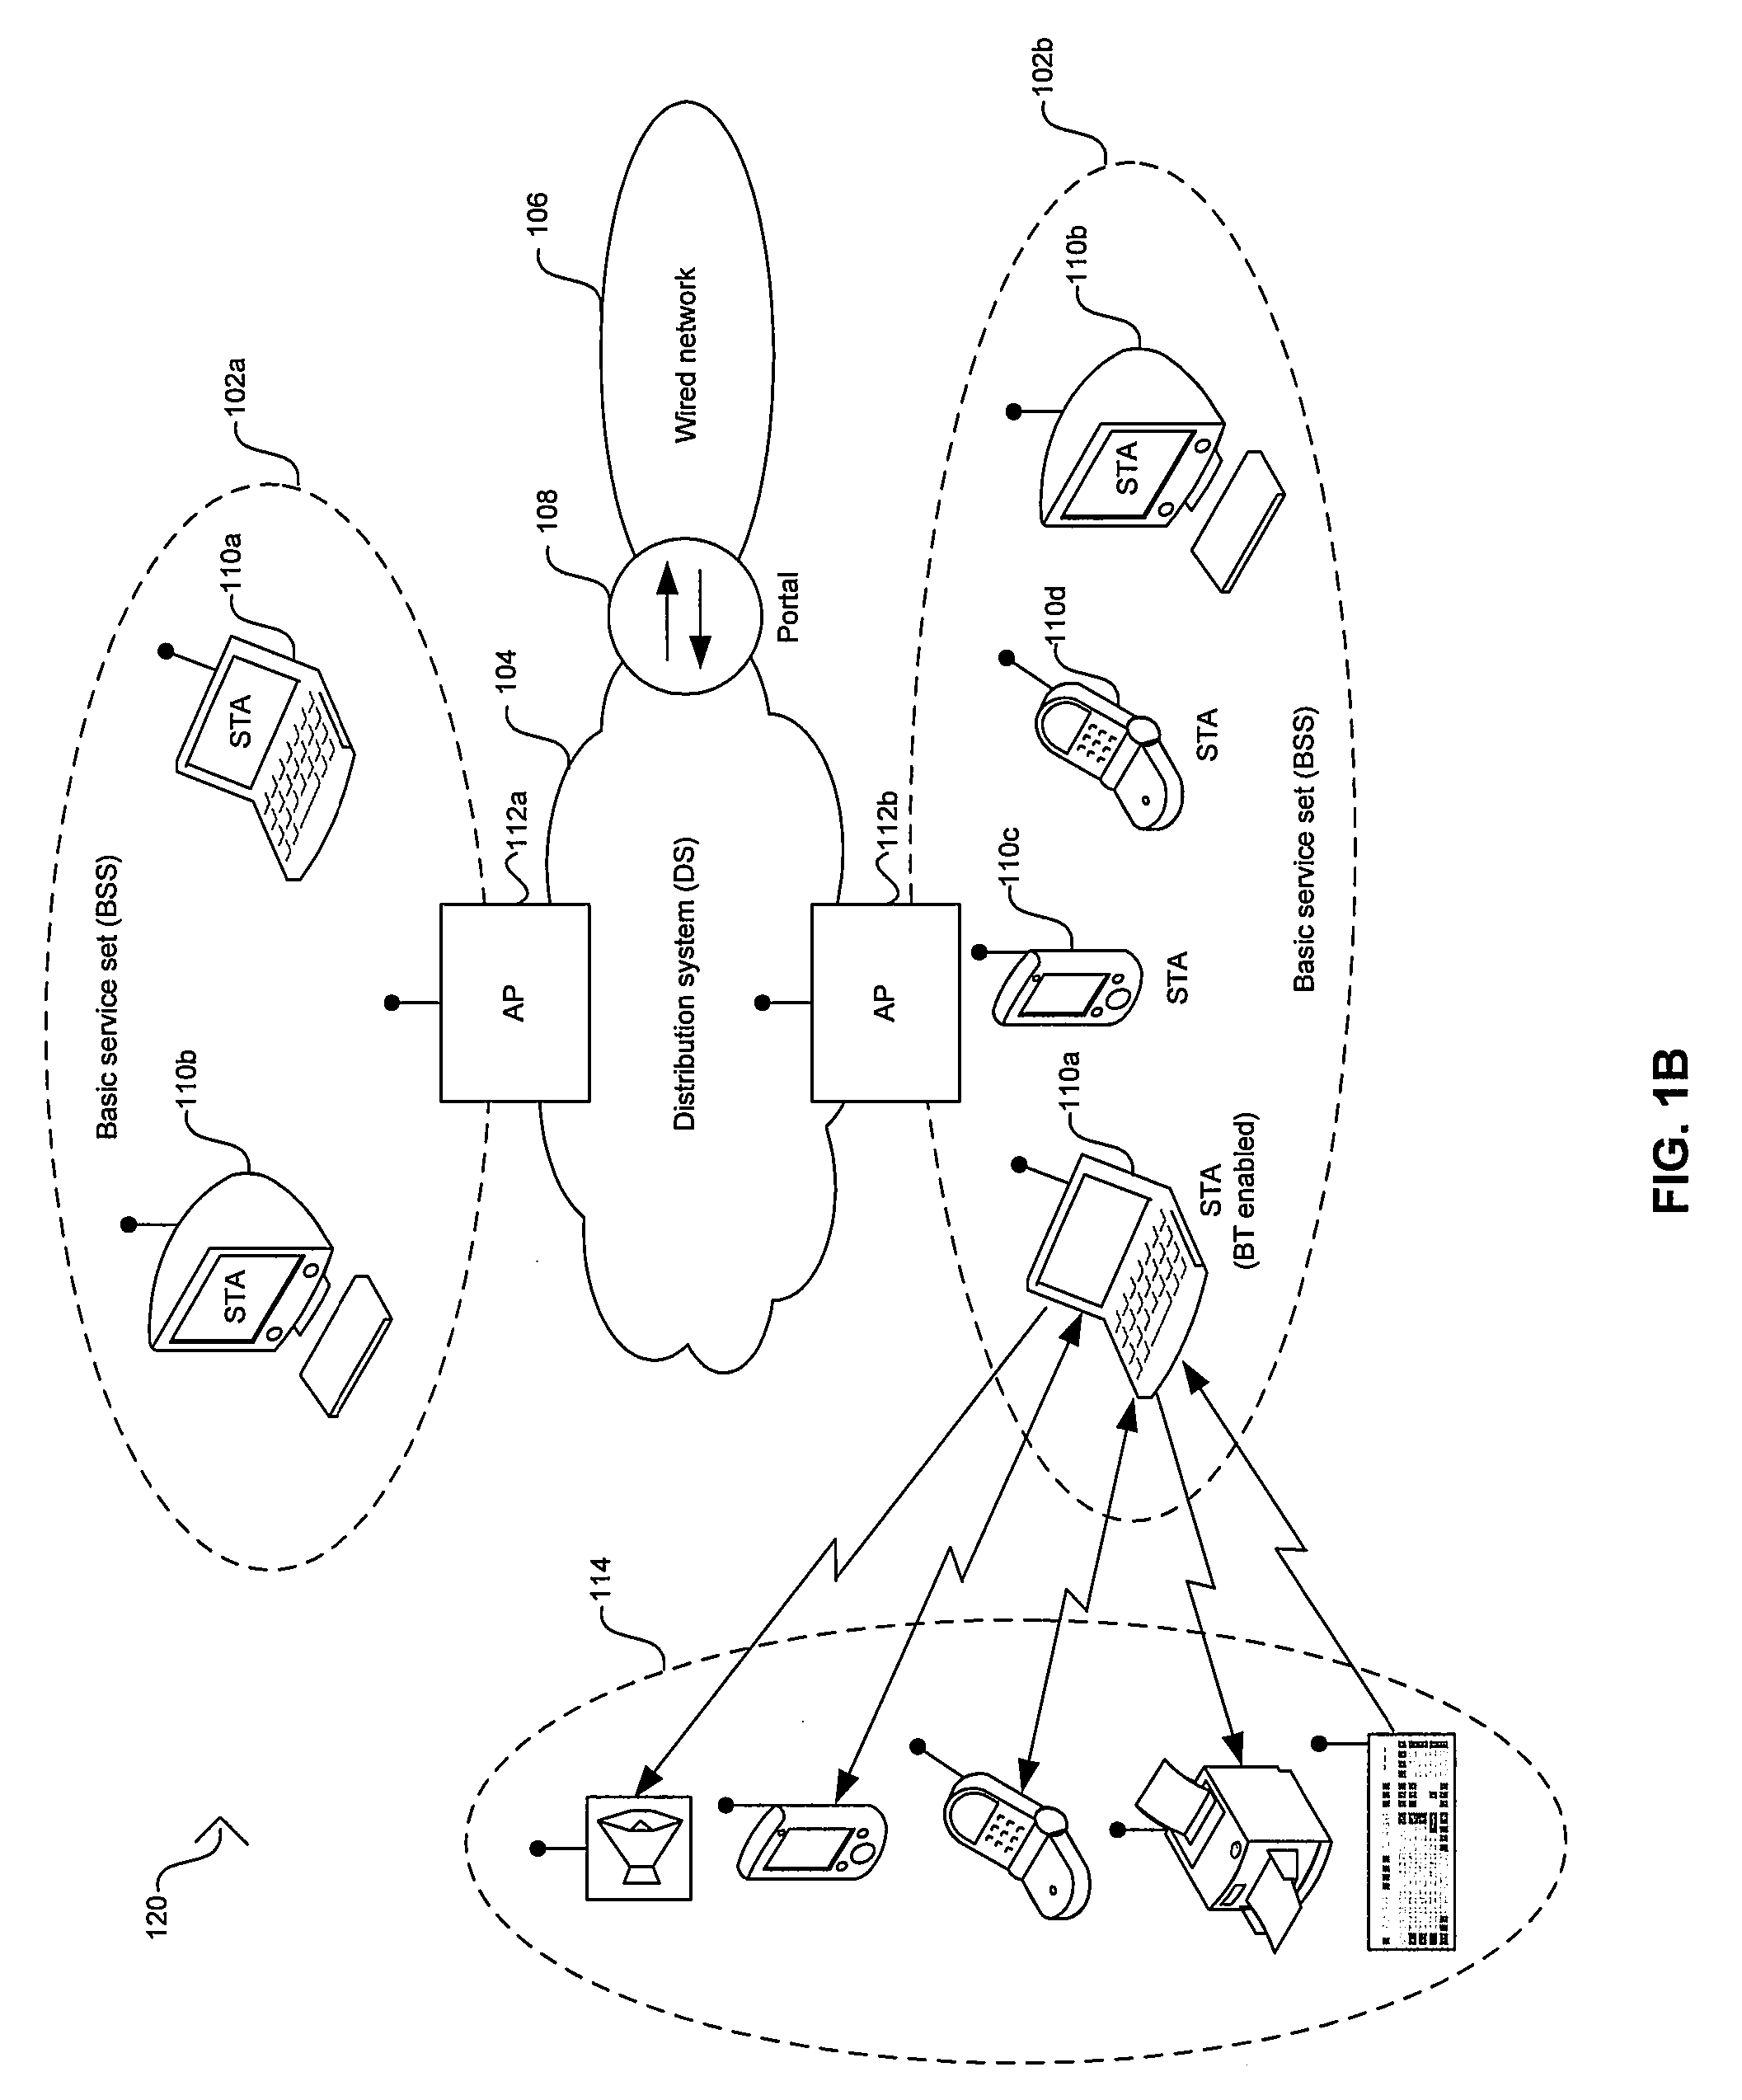 Method and System for Bluetooth and Wireless LAN Coexistence